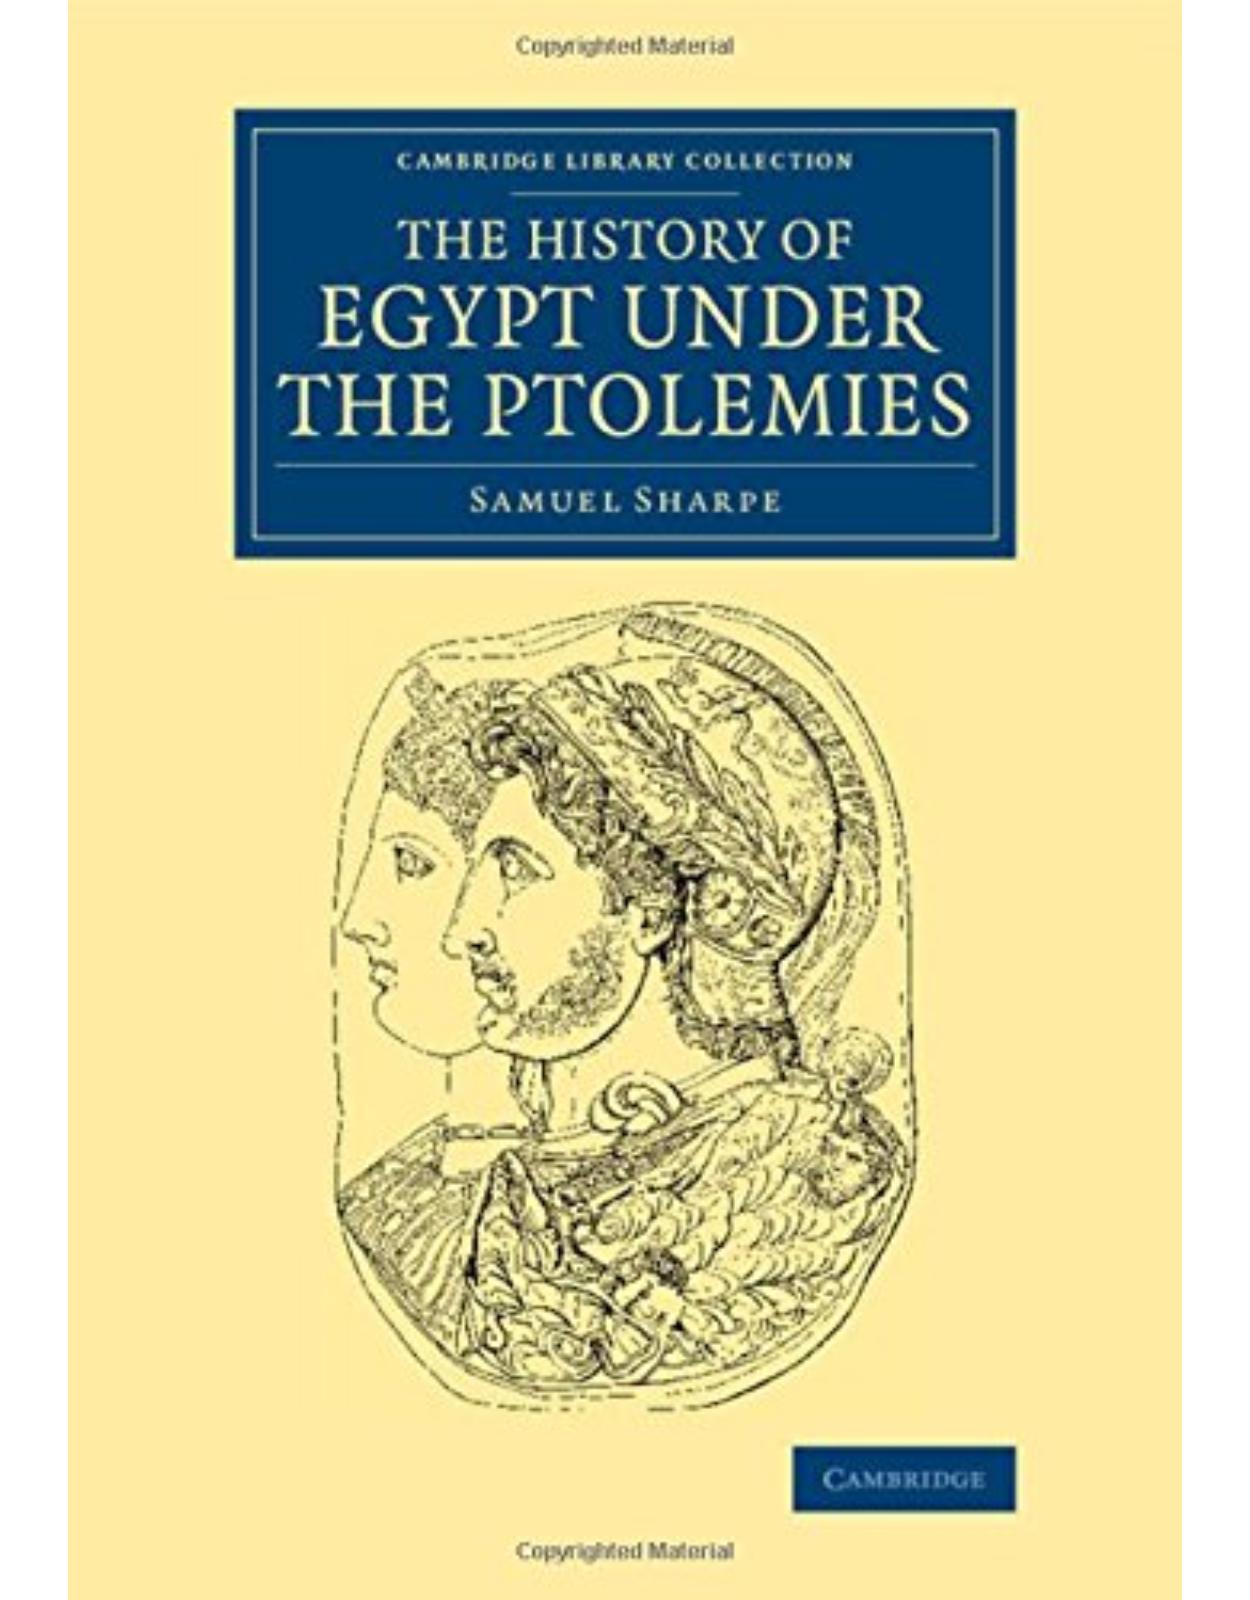 The History of Egypt under the Ptolemies (Cambridge Library Collection - Egyptology)